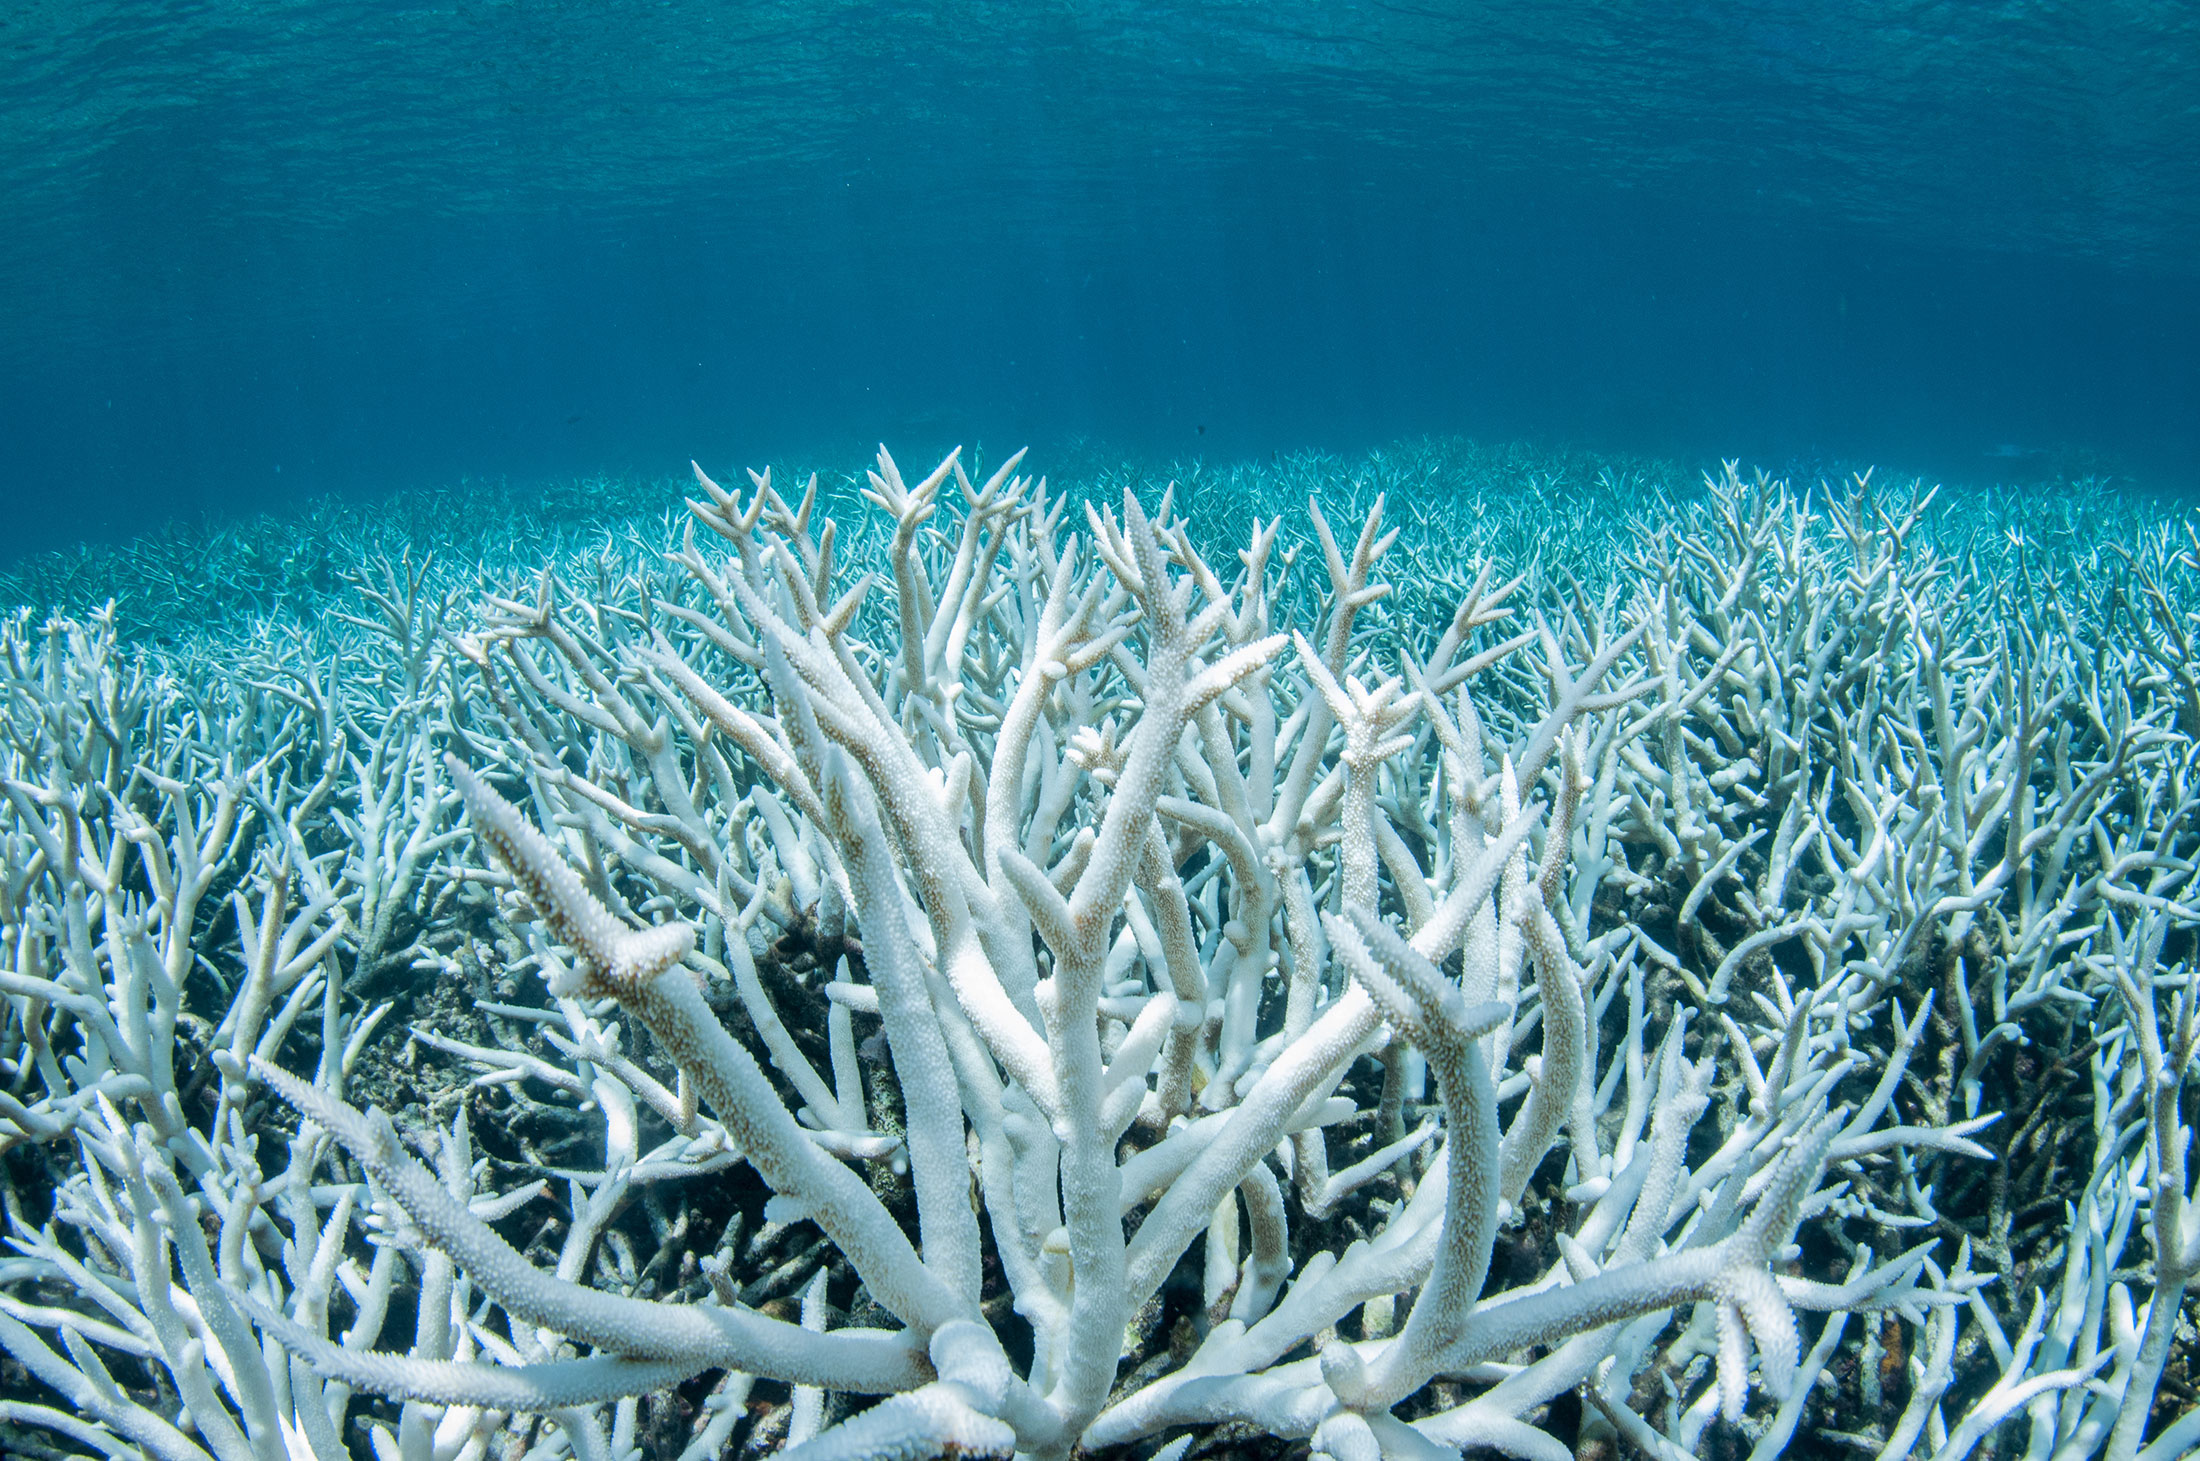 Scientists Have Begun Conserving Coral by Slicing and Freezing It